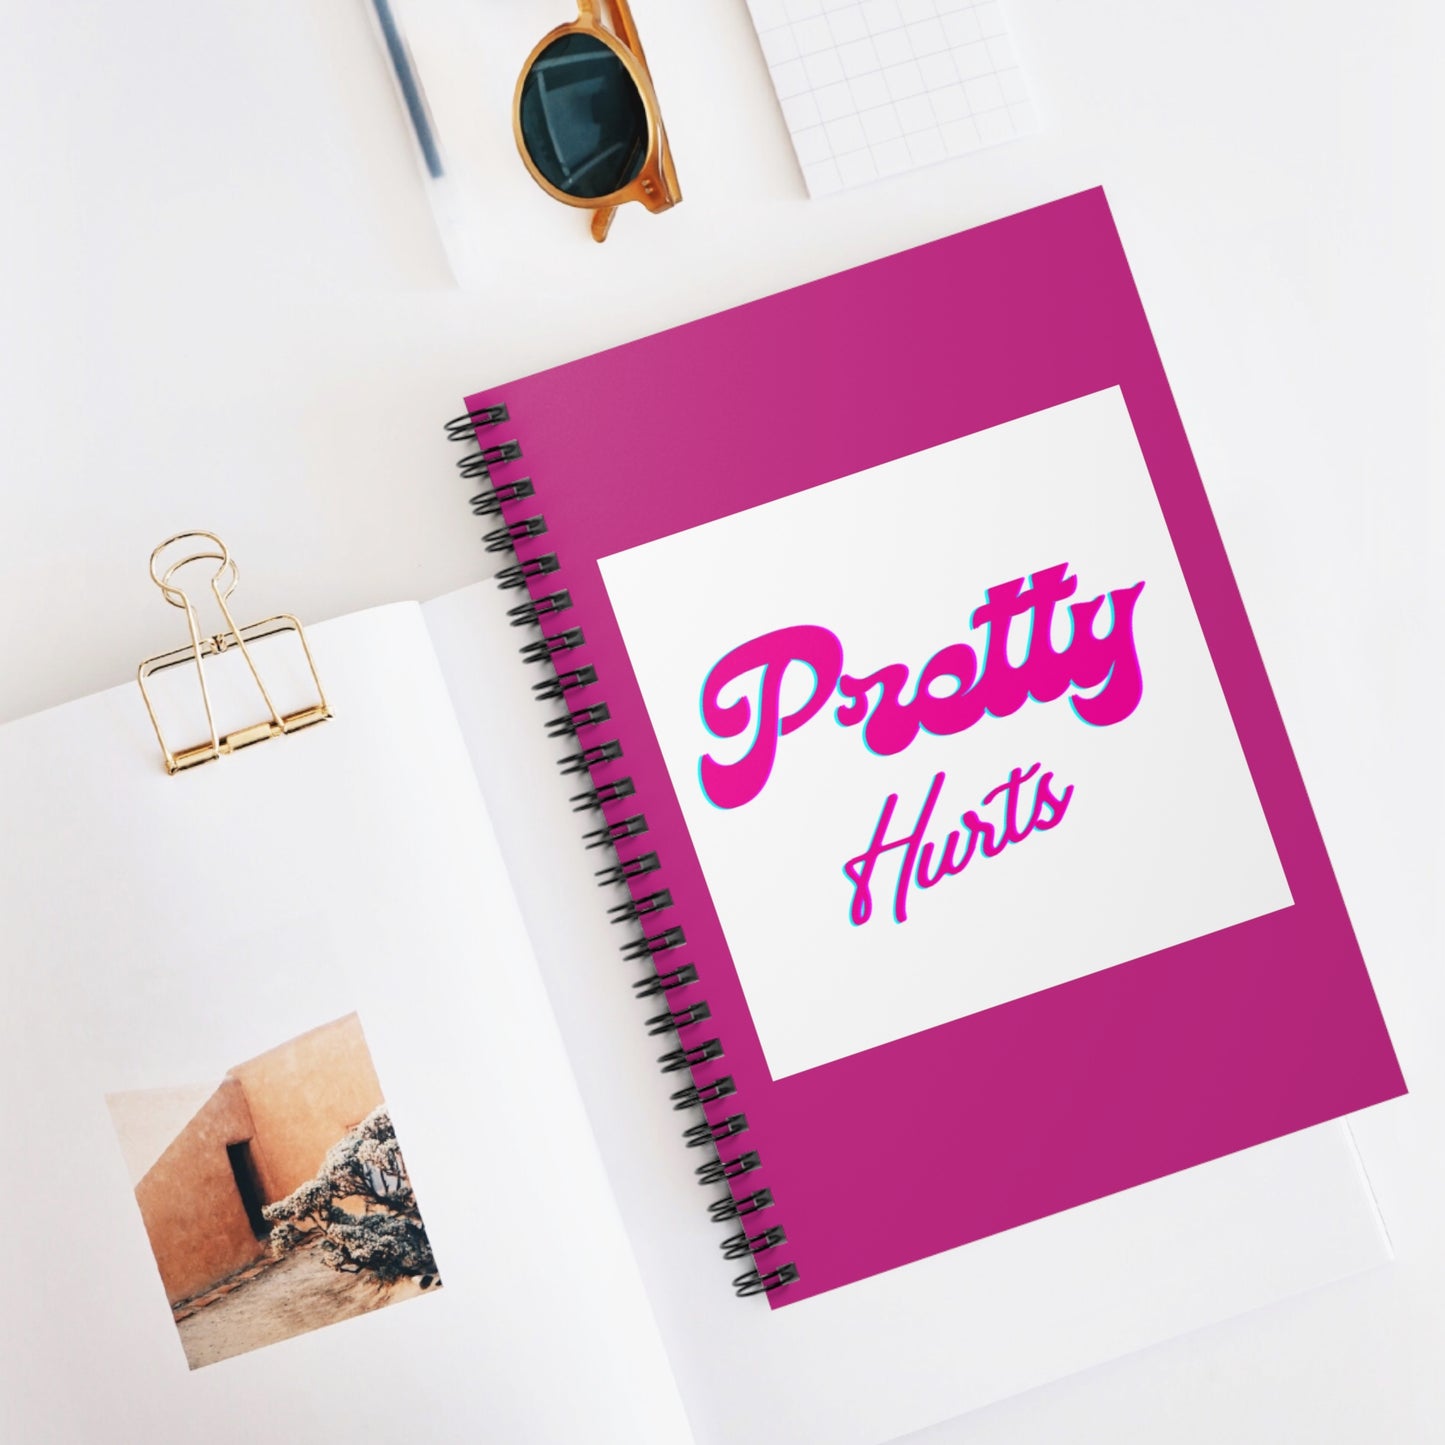 Pretty Hurts Spiral Notebook - Ruled Line